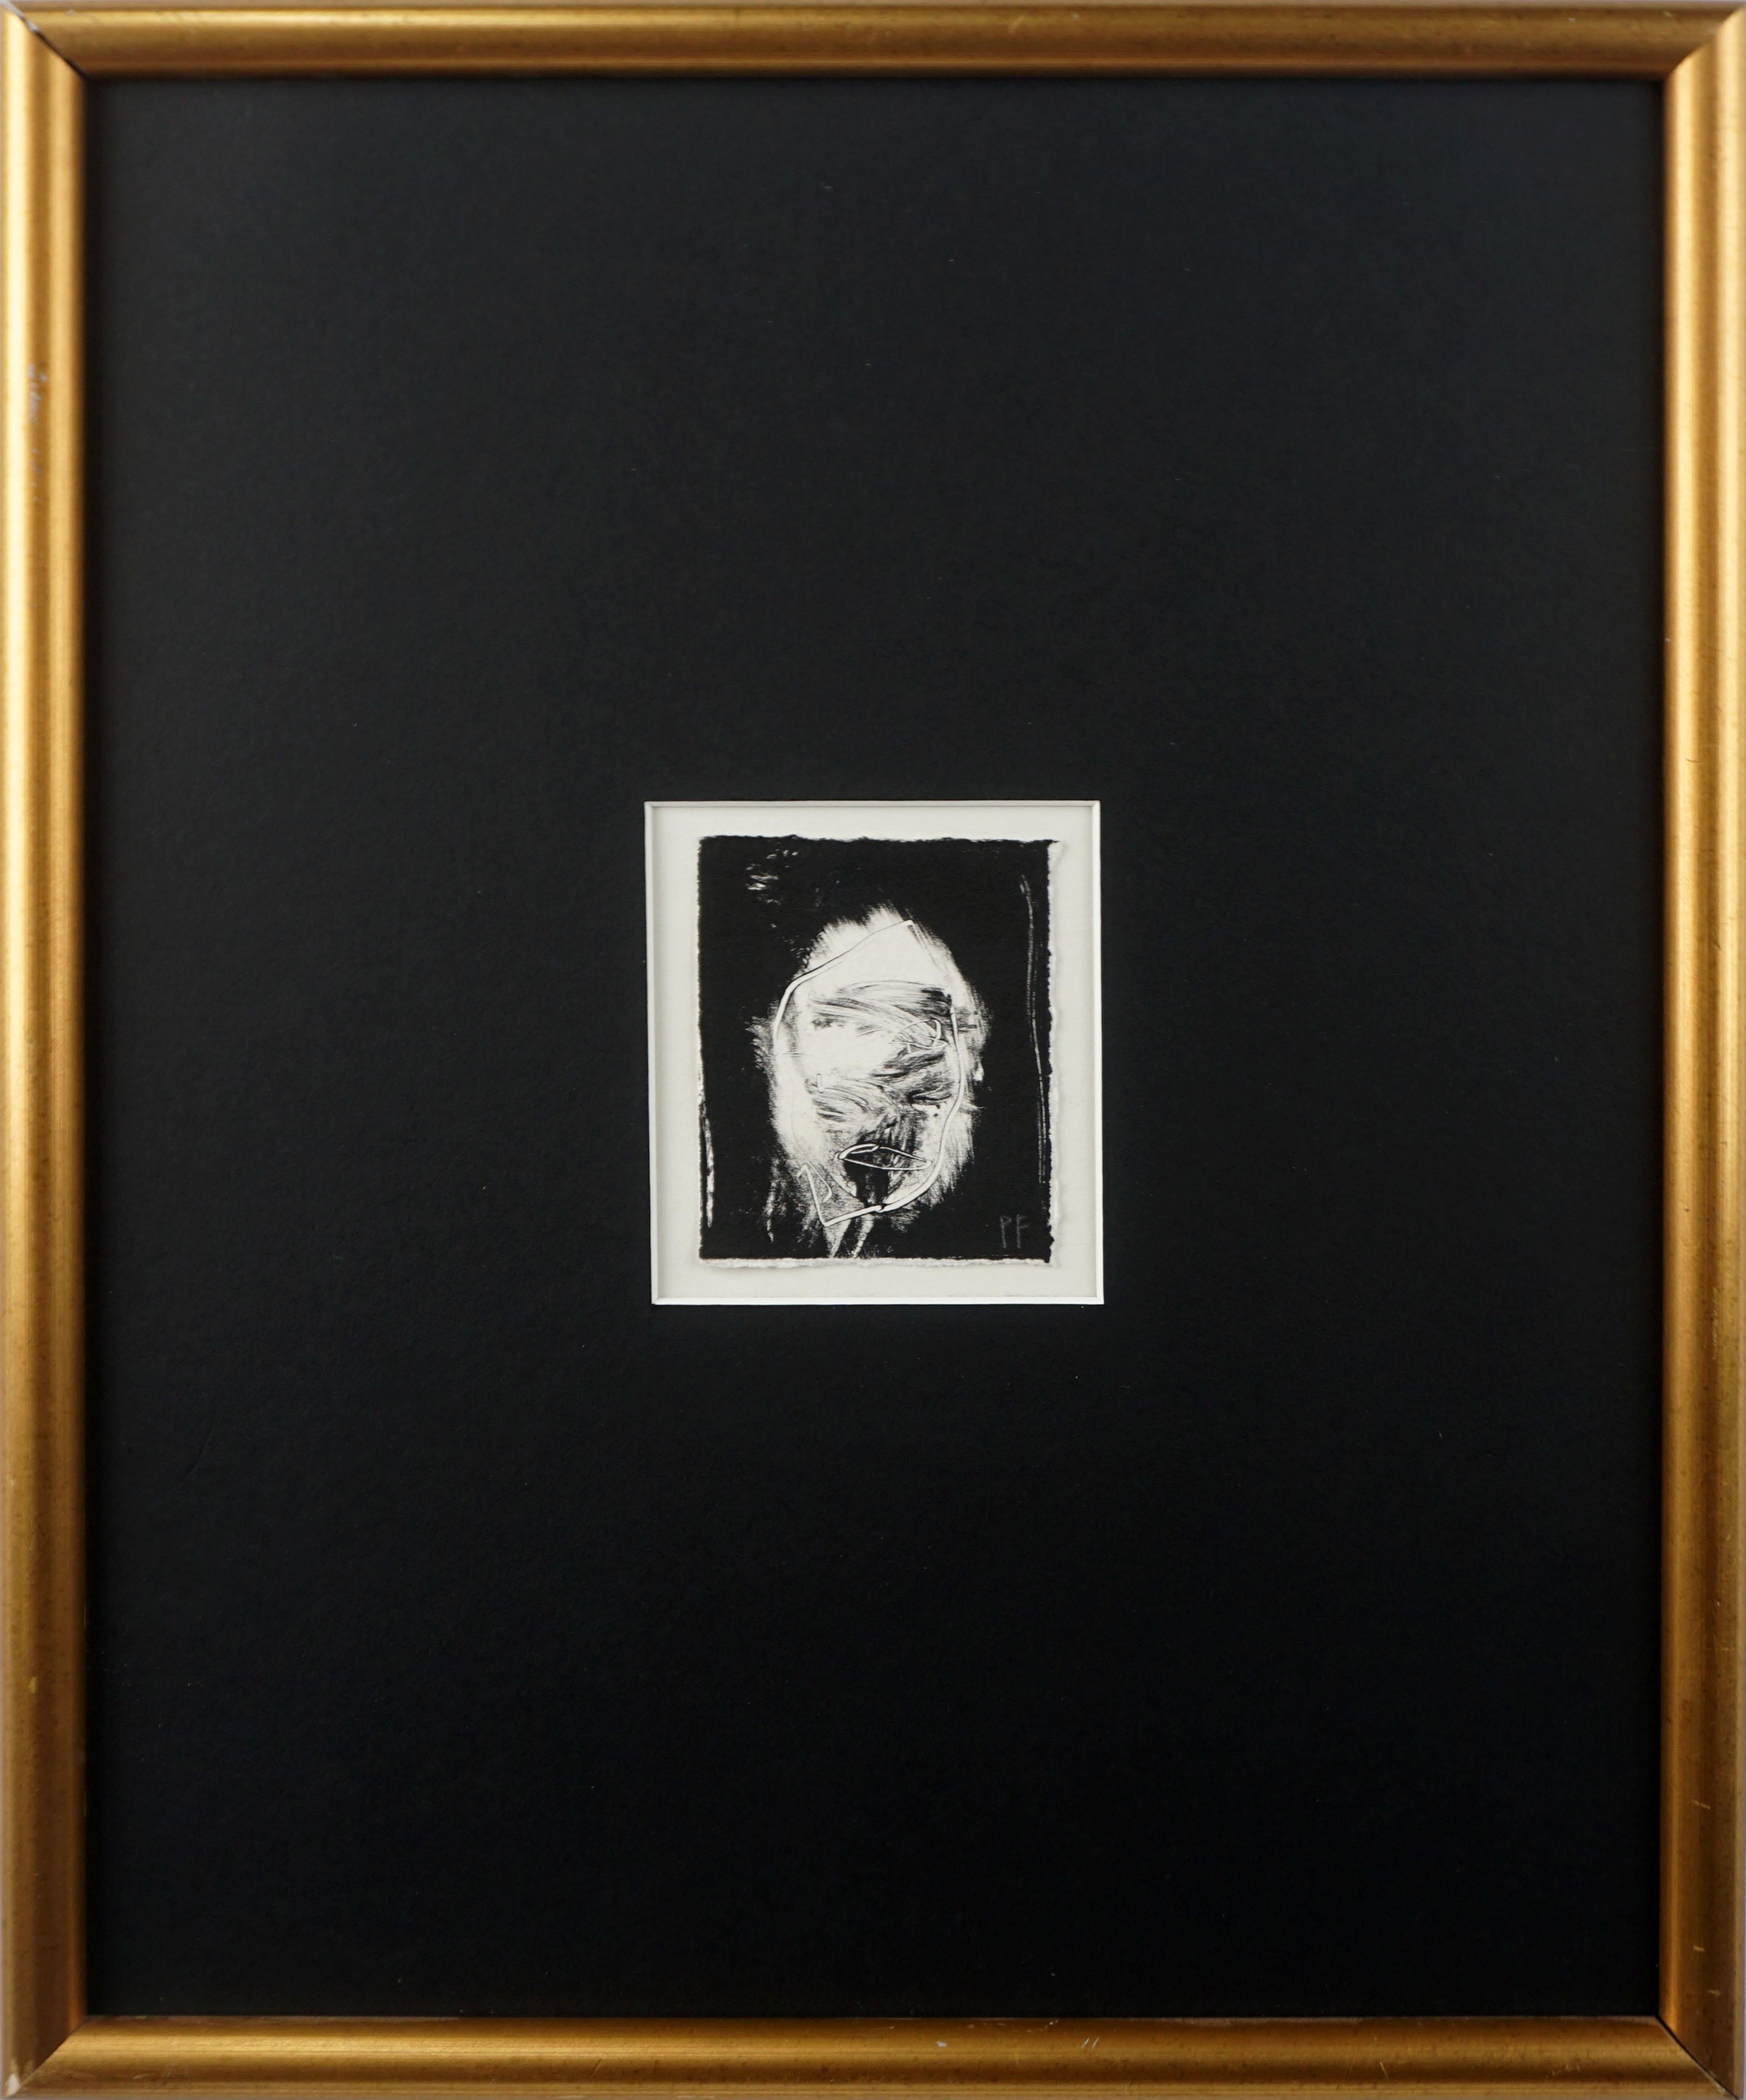 Peter Foley Abstract Print - "Noir #11", Contemporary Miniature Figurative Abstract Lithograph in Black